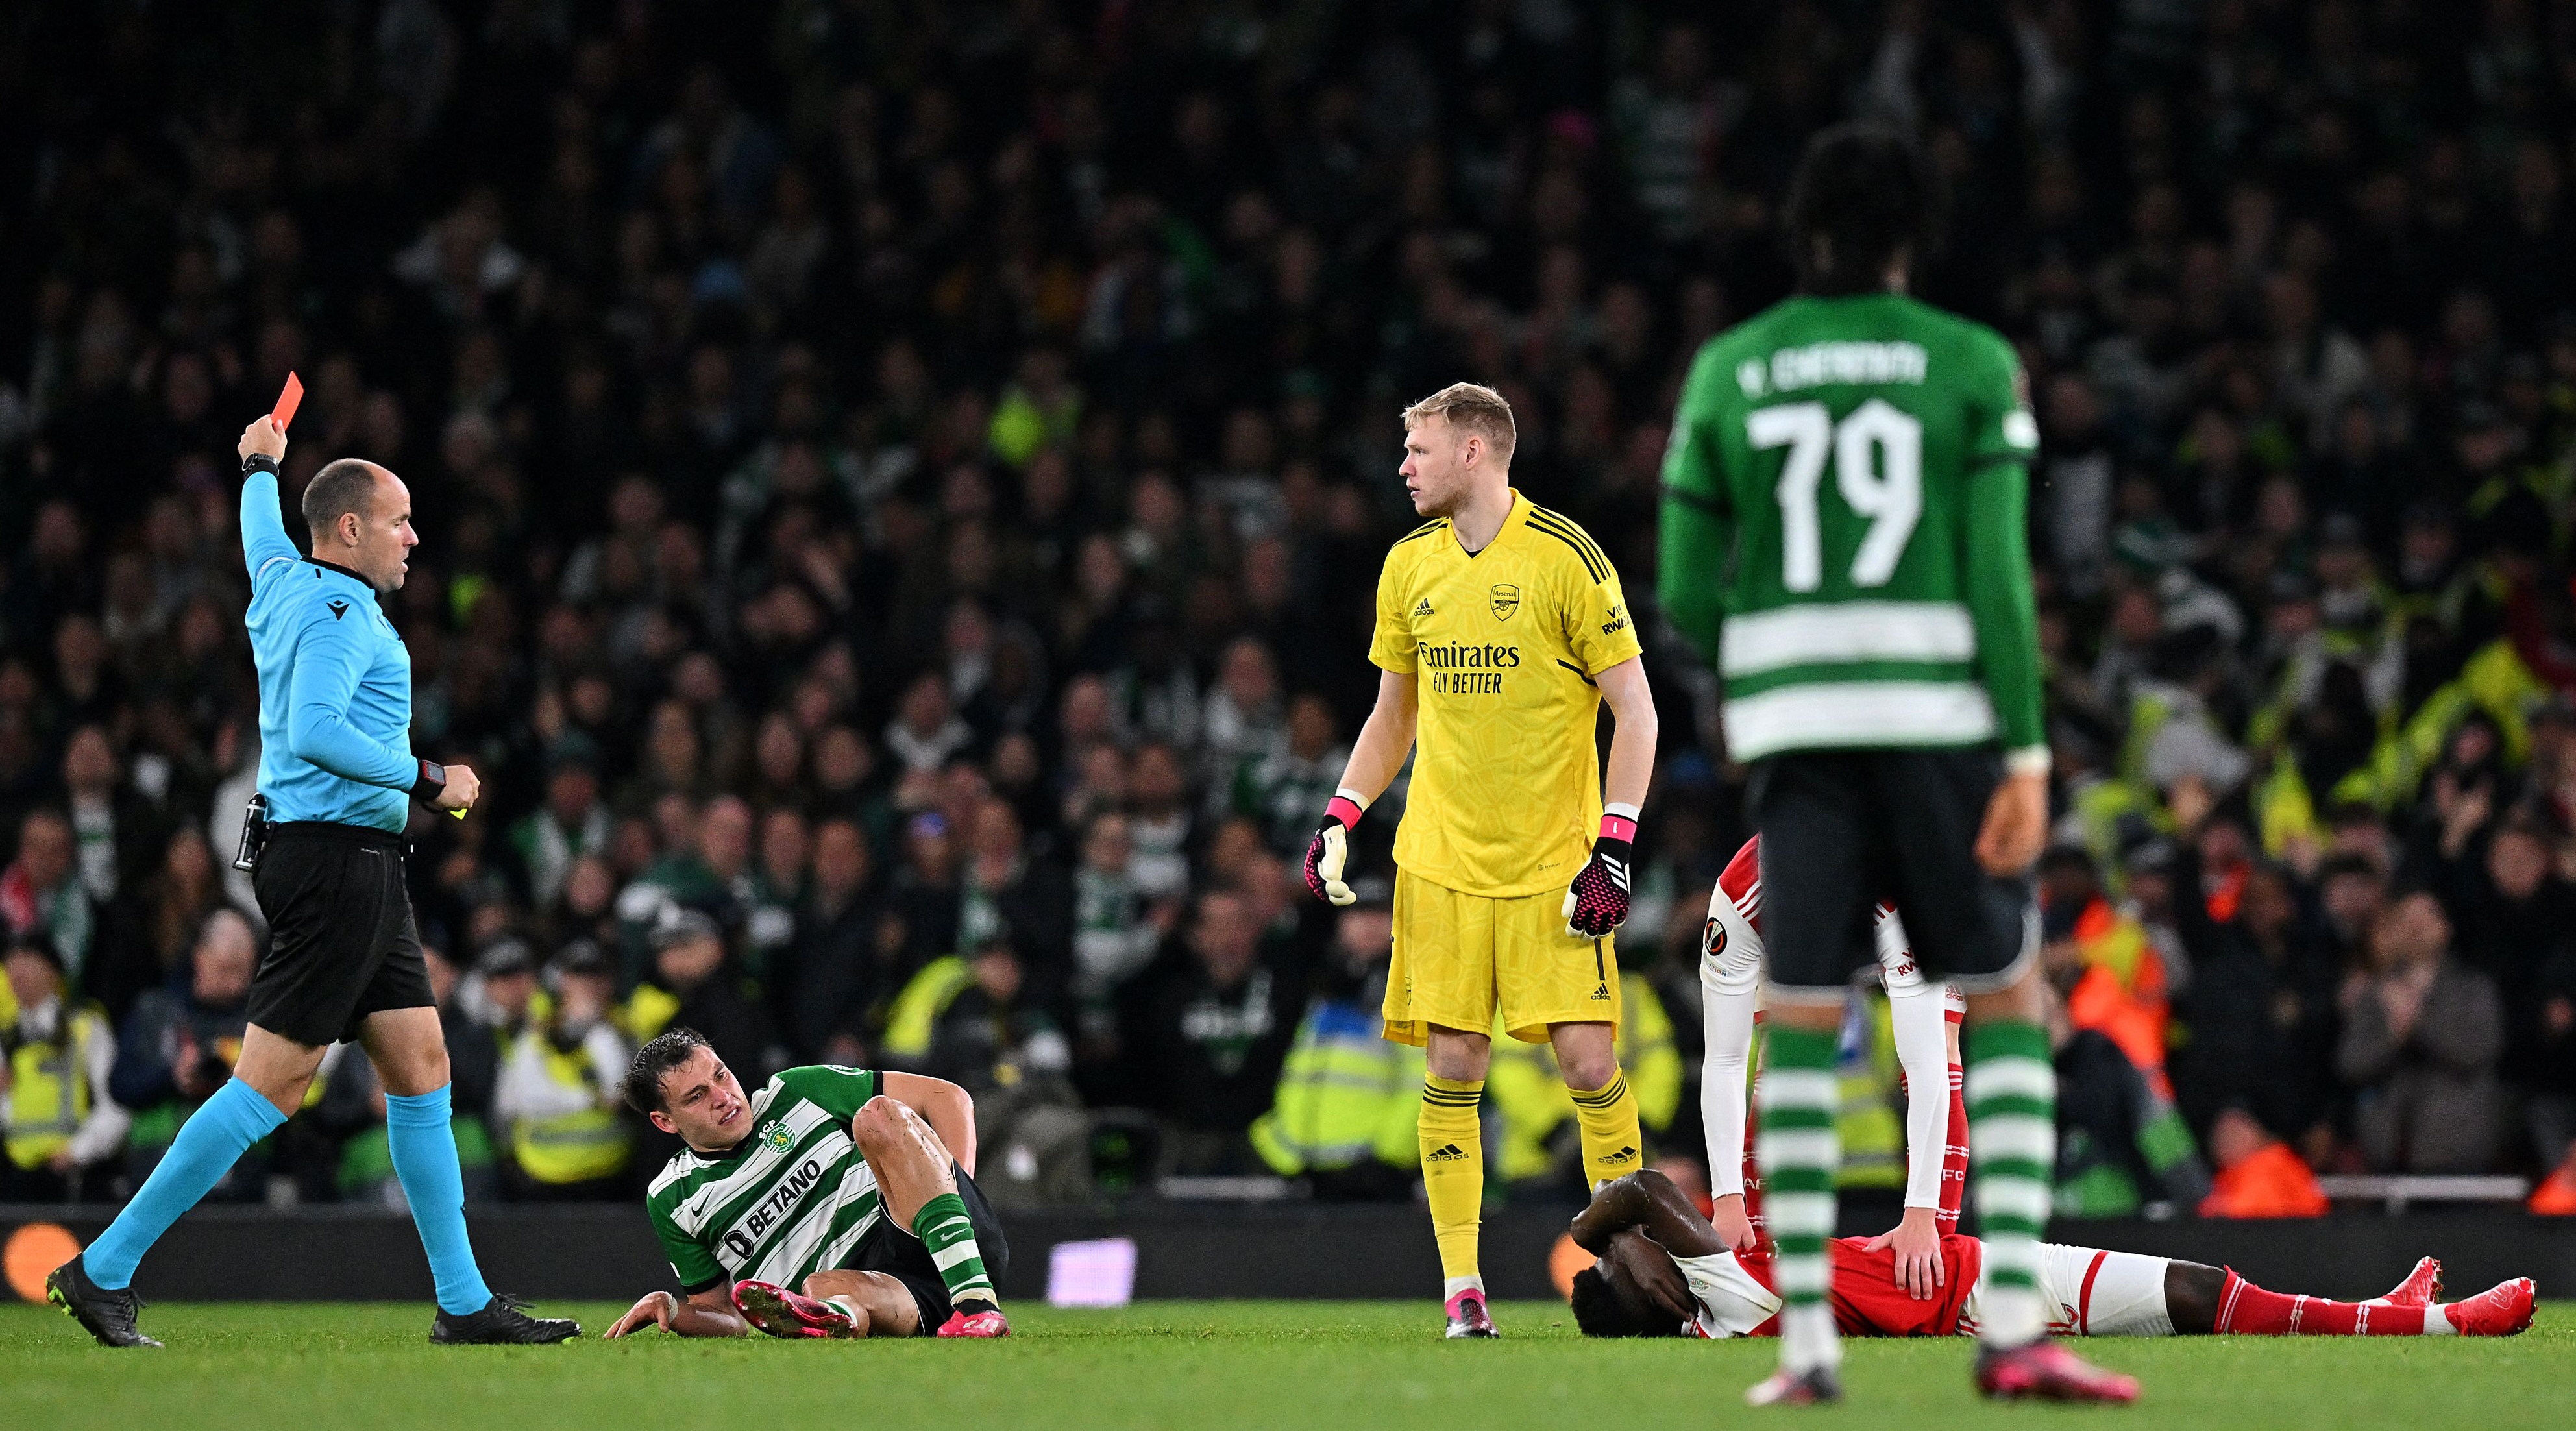 Referee Antonio Mateu Lahoz shows Manuel Ugarte of Sporting Lisbon a second yellow card for a foul on Bukayo Saka of Arsenal during the UEFA Europa League last 16 second leg match between Arsenal and Sporting Lisbon at the Emirates Stadium on March 17, 2023 in London, United Kingdom.